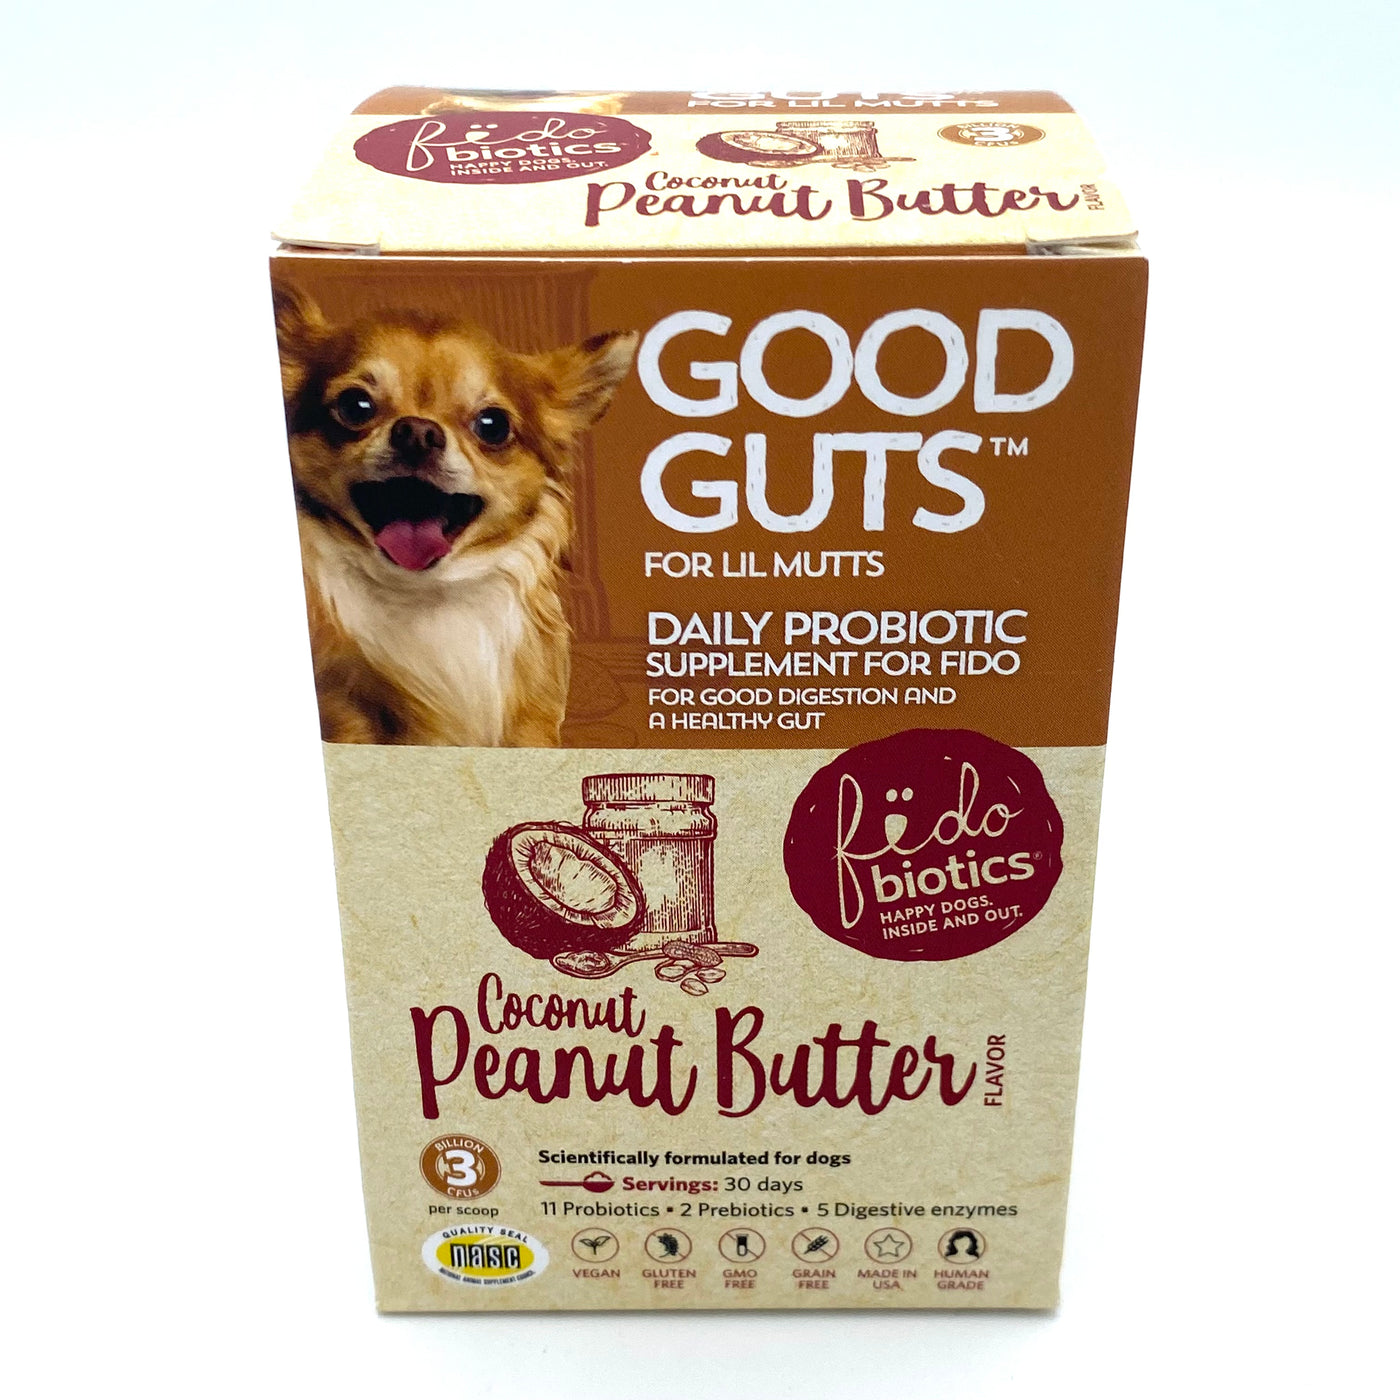 Good Guts for Lil Mutts Peanut Butter